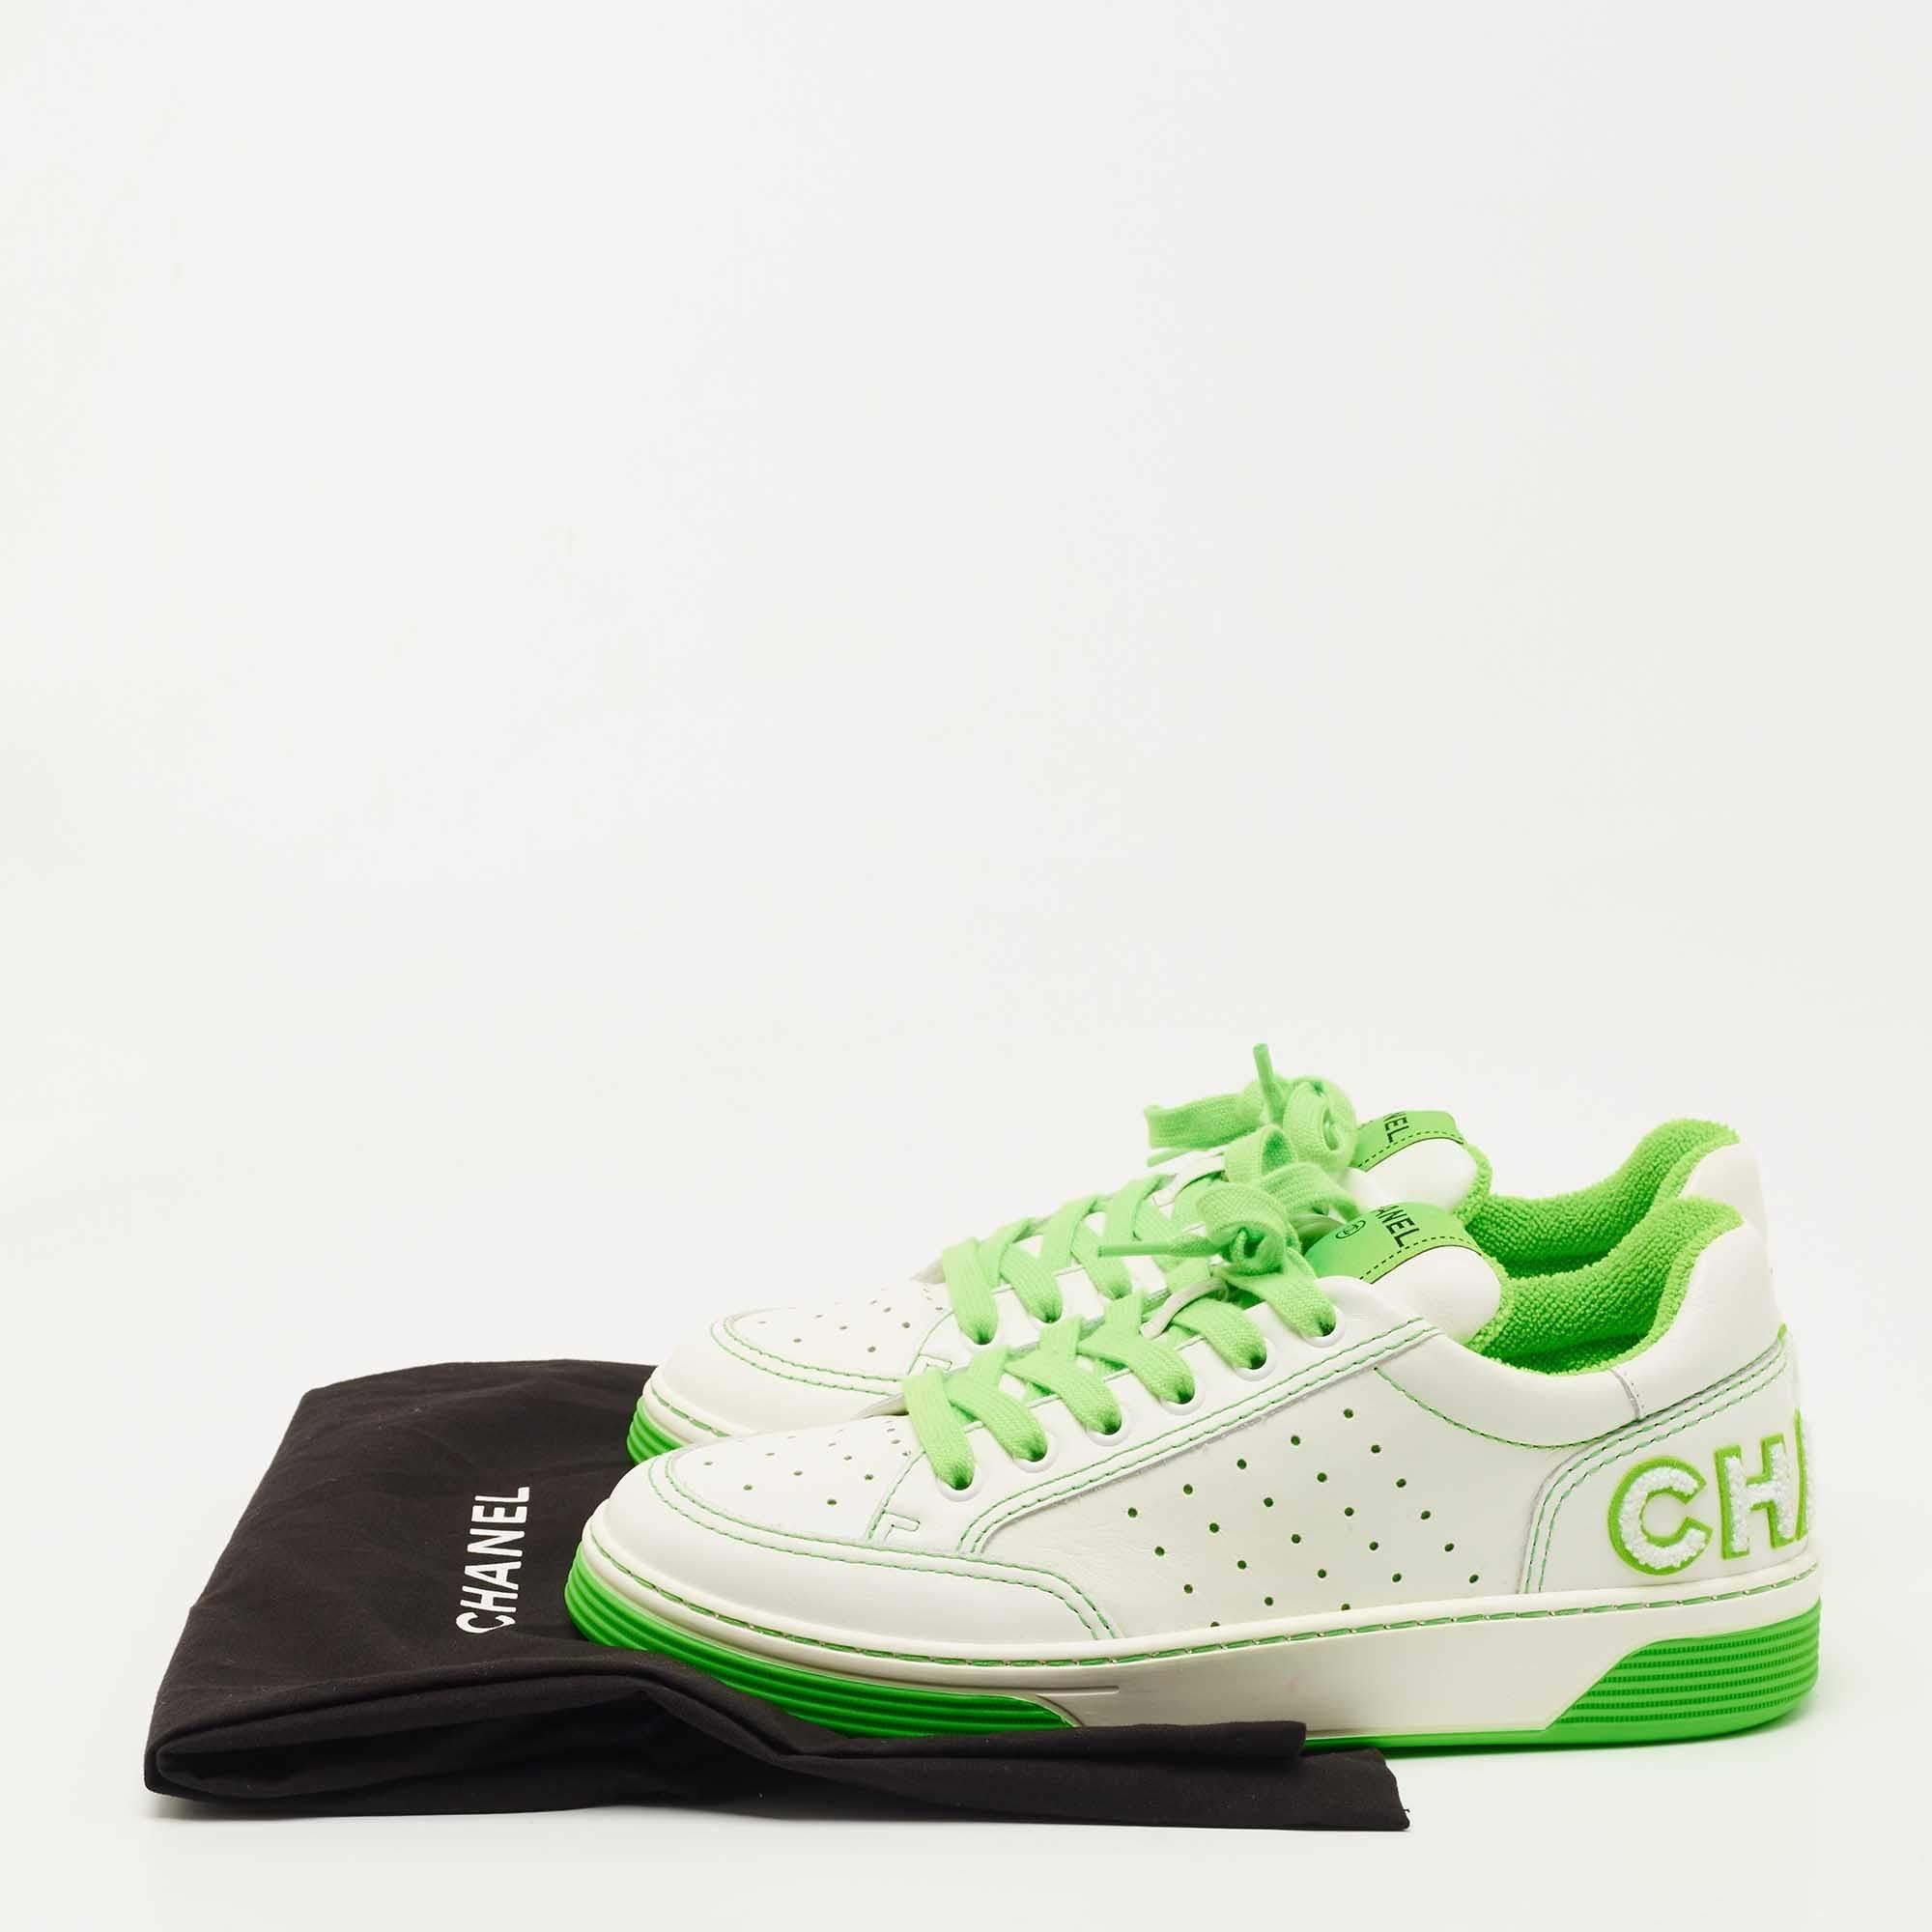 Chanel White/Neon Green Leather 22P Trainer Sneakers Size 38.5 1